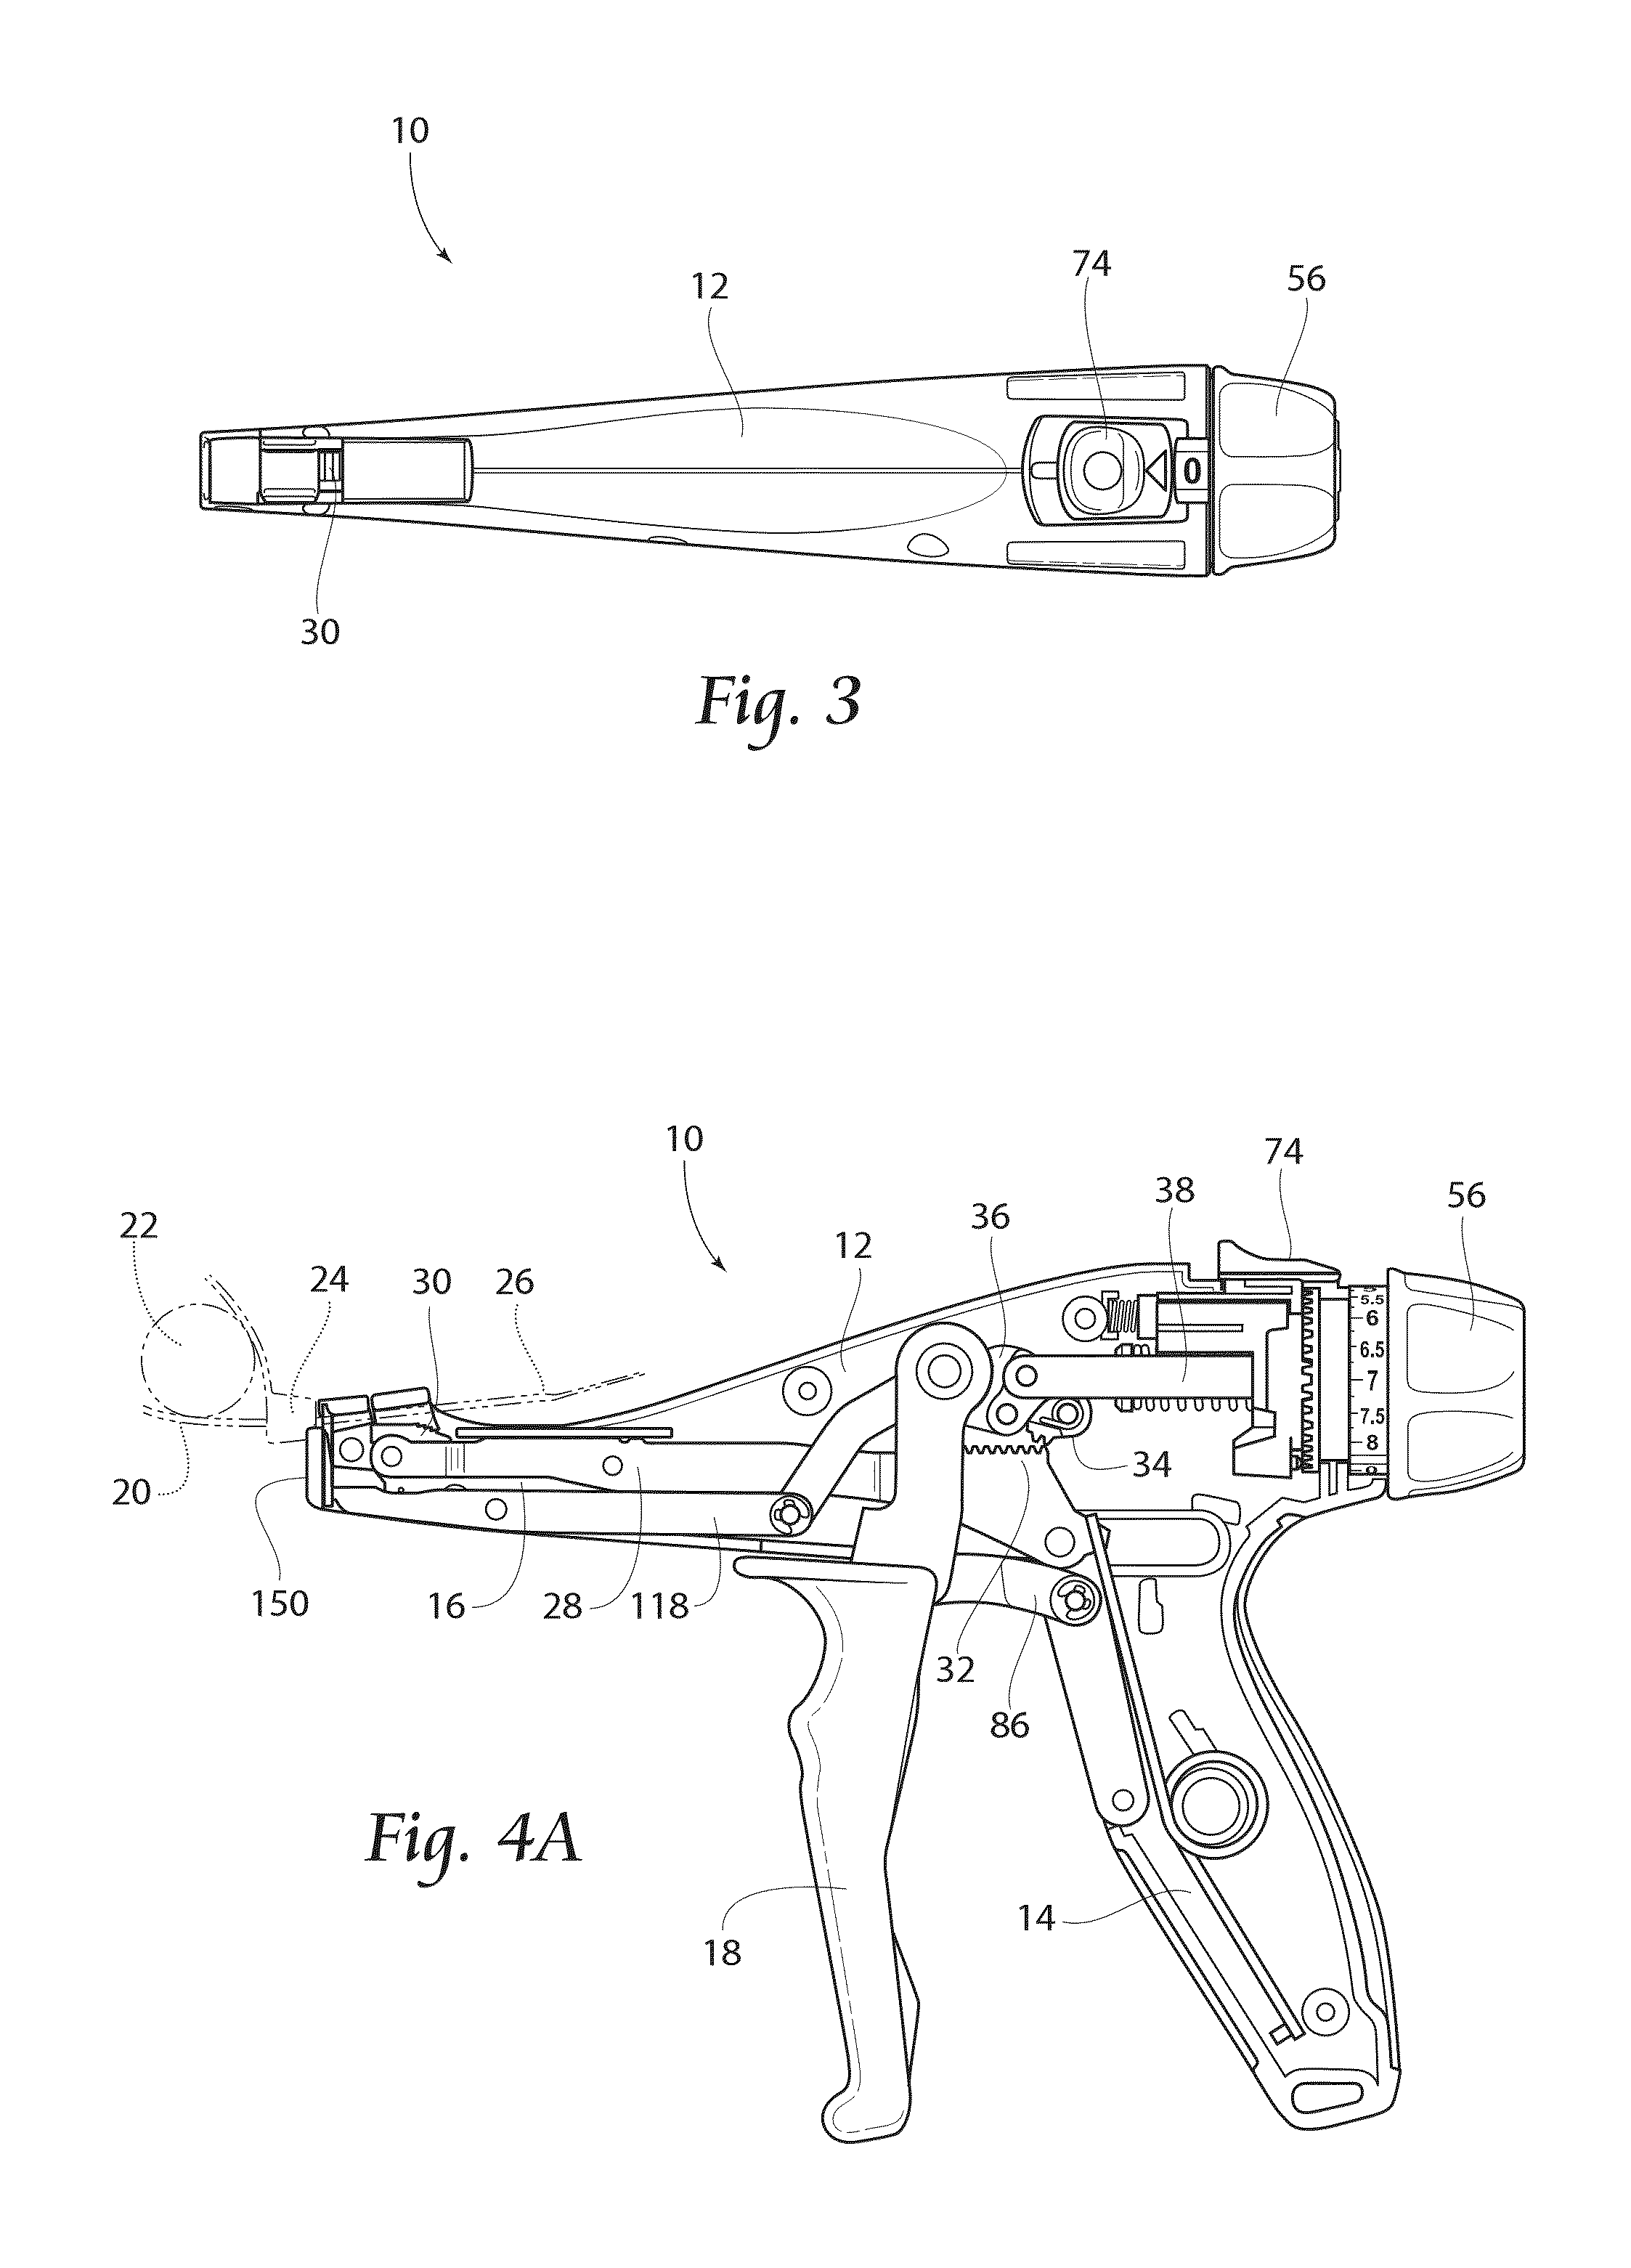 Cable tie tensioning and cut-off tool